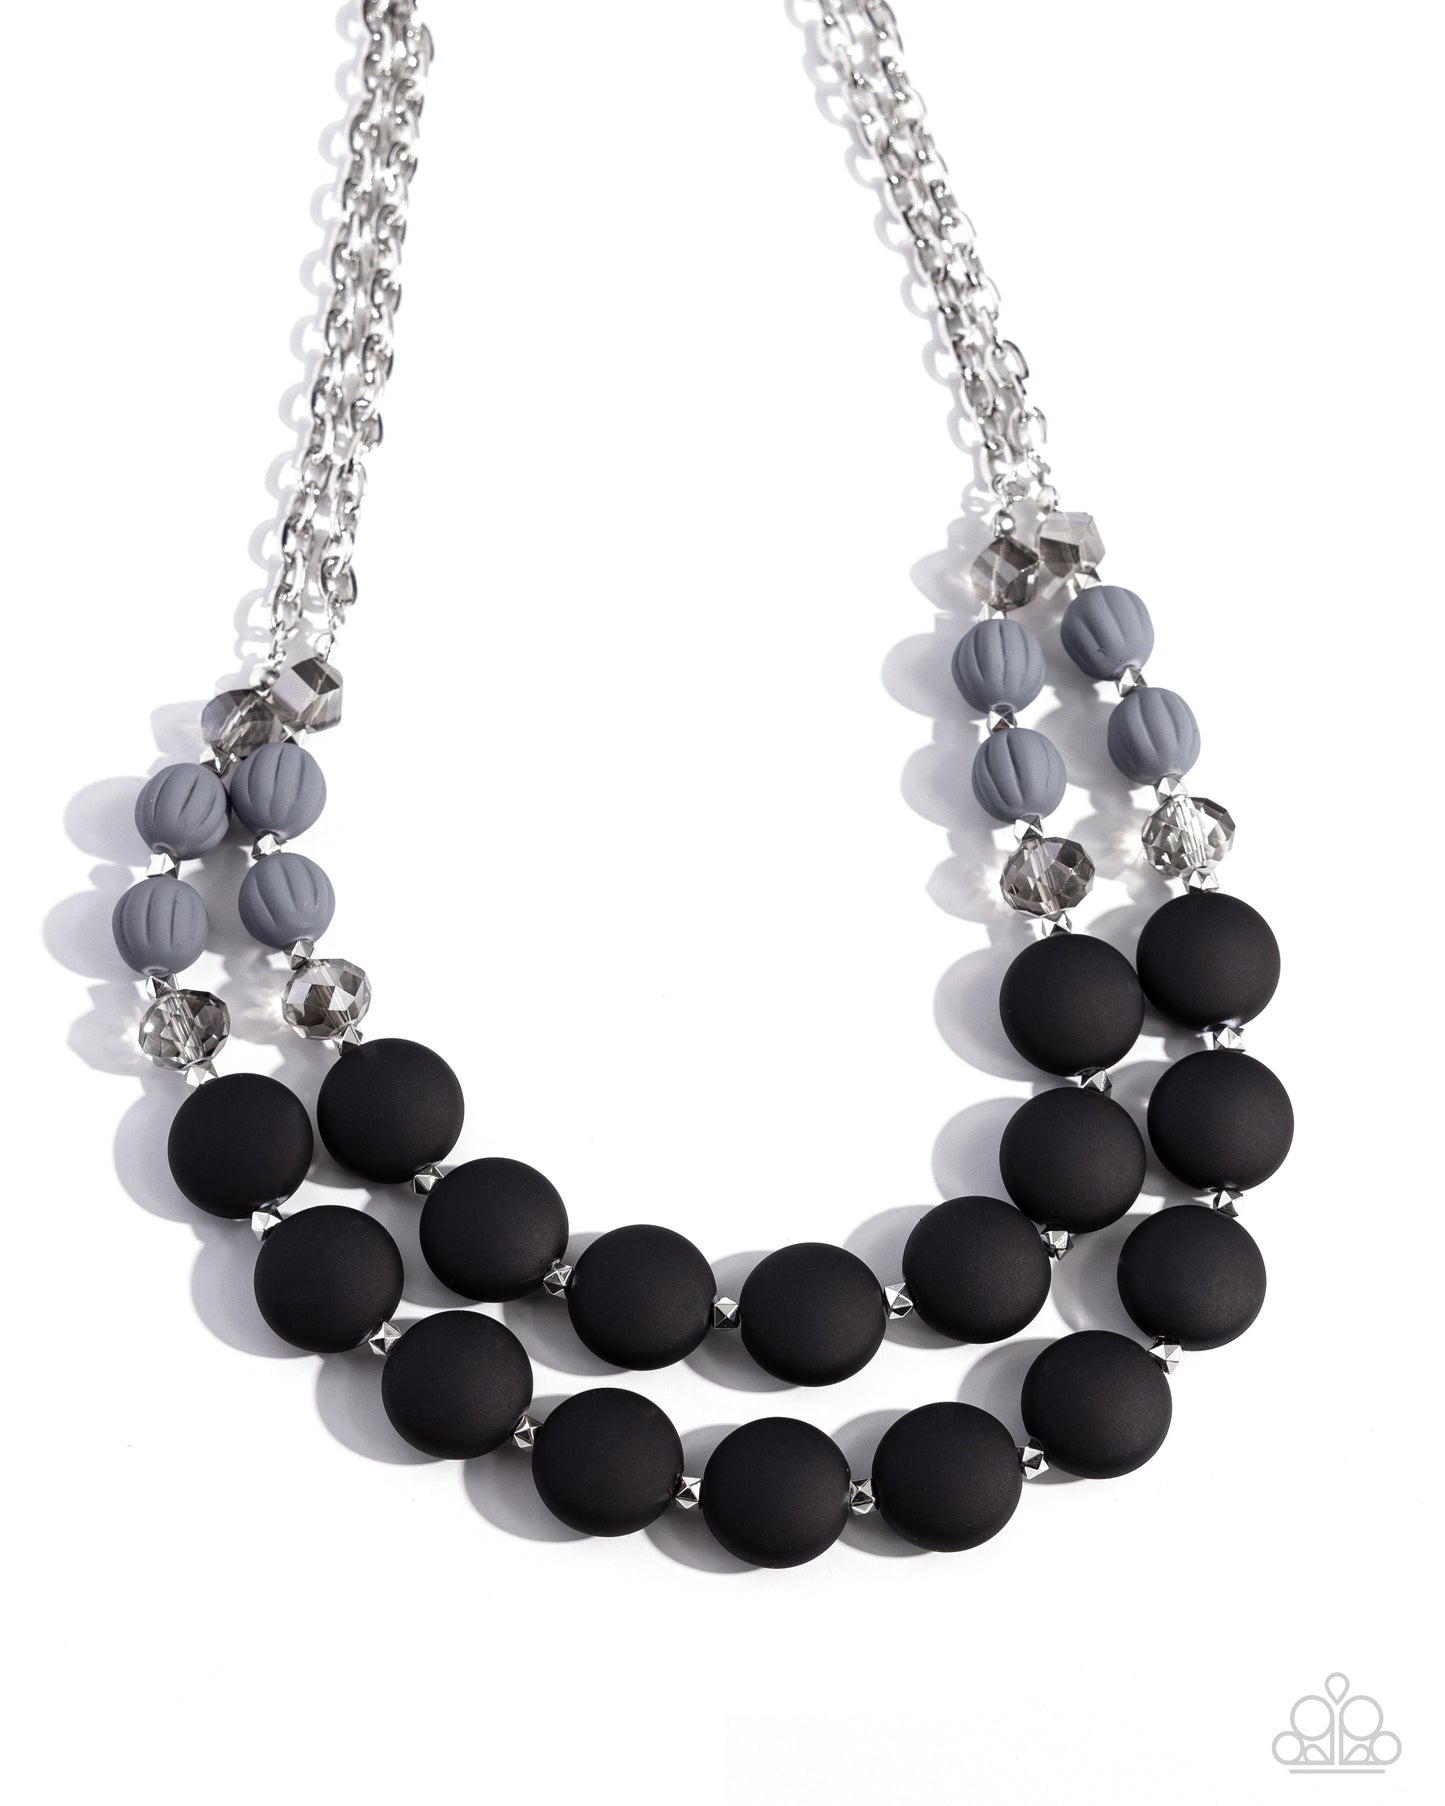 Whimsically Wealthy Black Necklace - Paparazzi Accessories Smoky faceted beads, silver beads, Sharkskin beads, and black matte beads are infused along classic silver chains that layer below the neckline for a colorfully charismatic look. Features an adjustable clasp closure. Sold as one individual necklace. Includes one pair of matching earrings. SKU: P2WH-BKXX-325XX